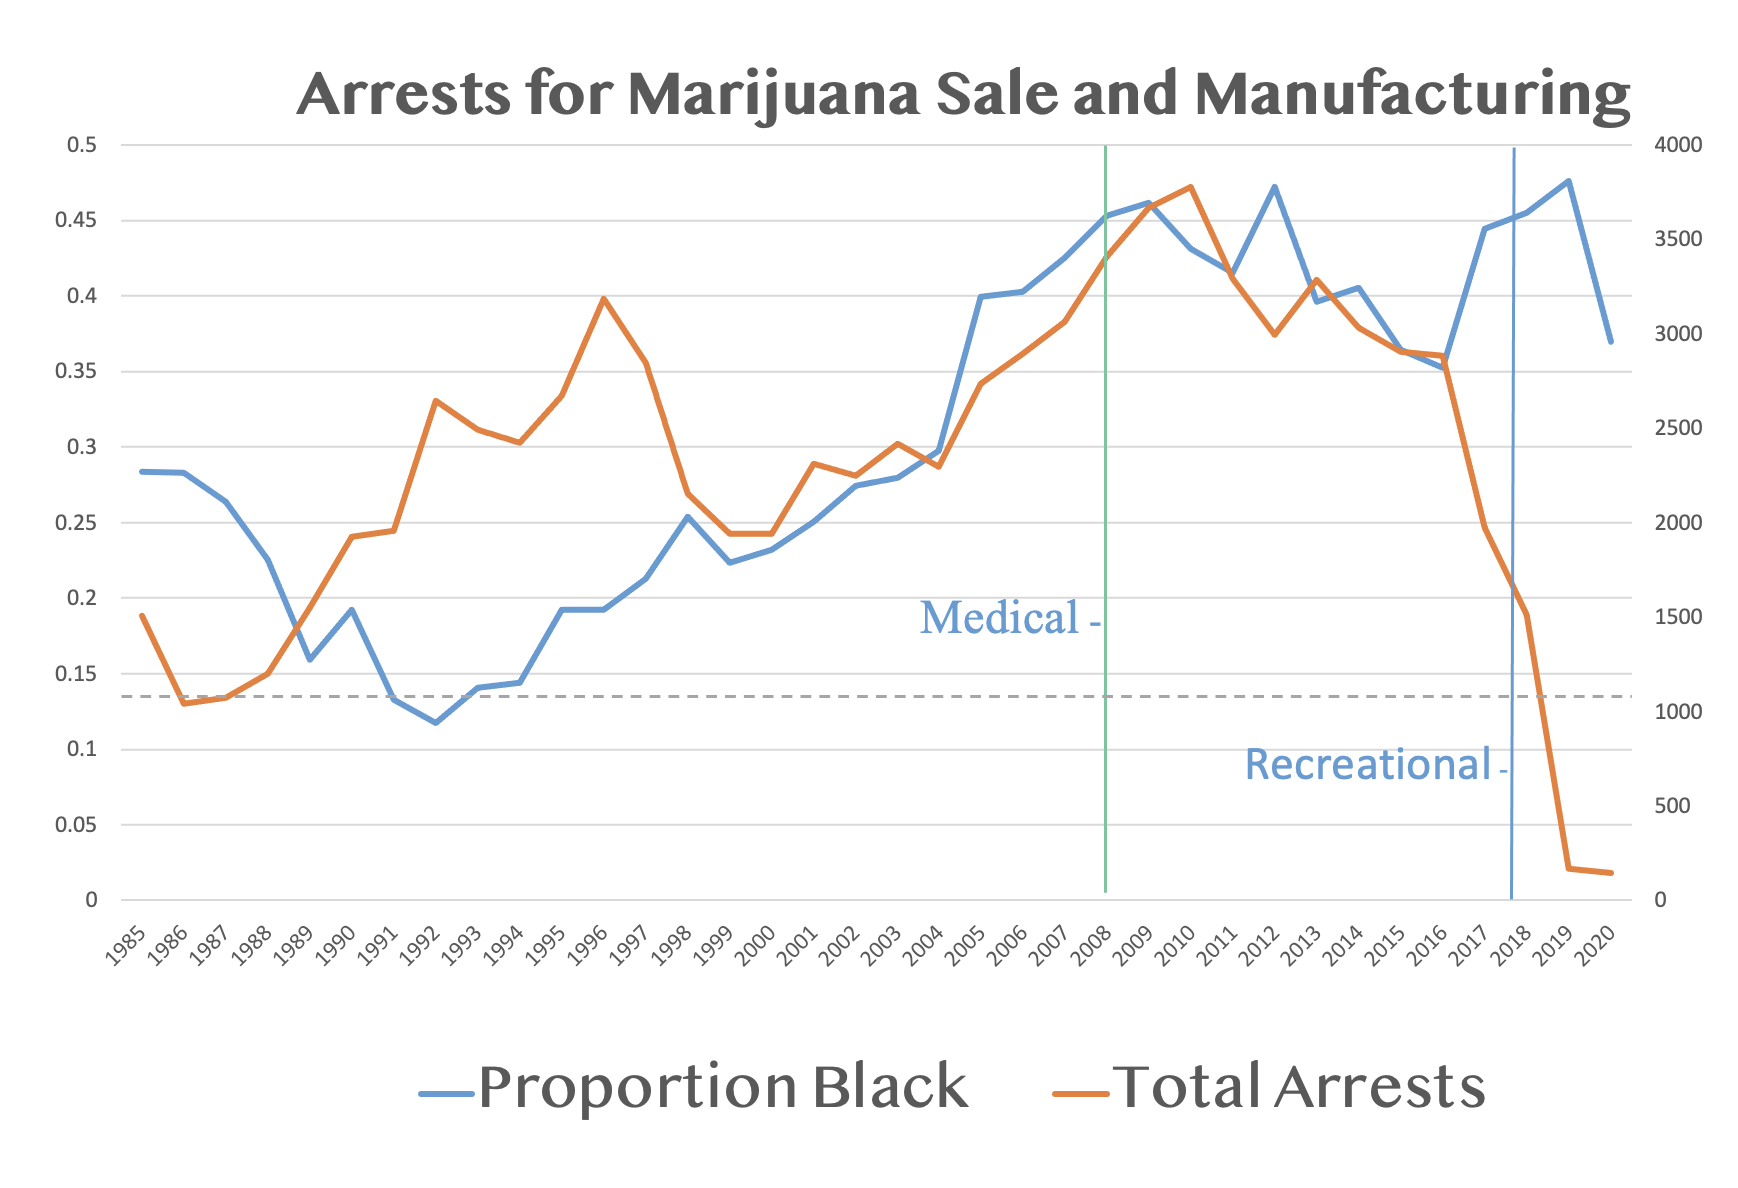 graph of arrests for the sale and manufacture of marijuana over the years